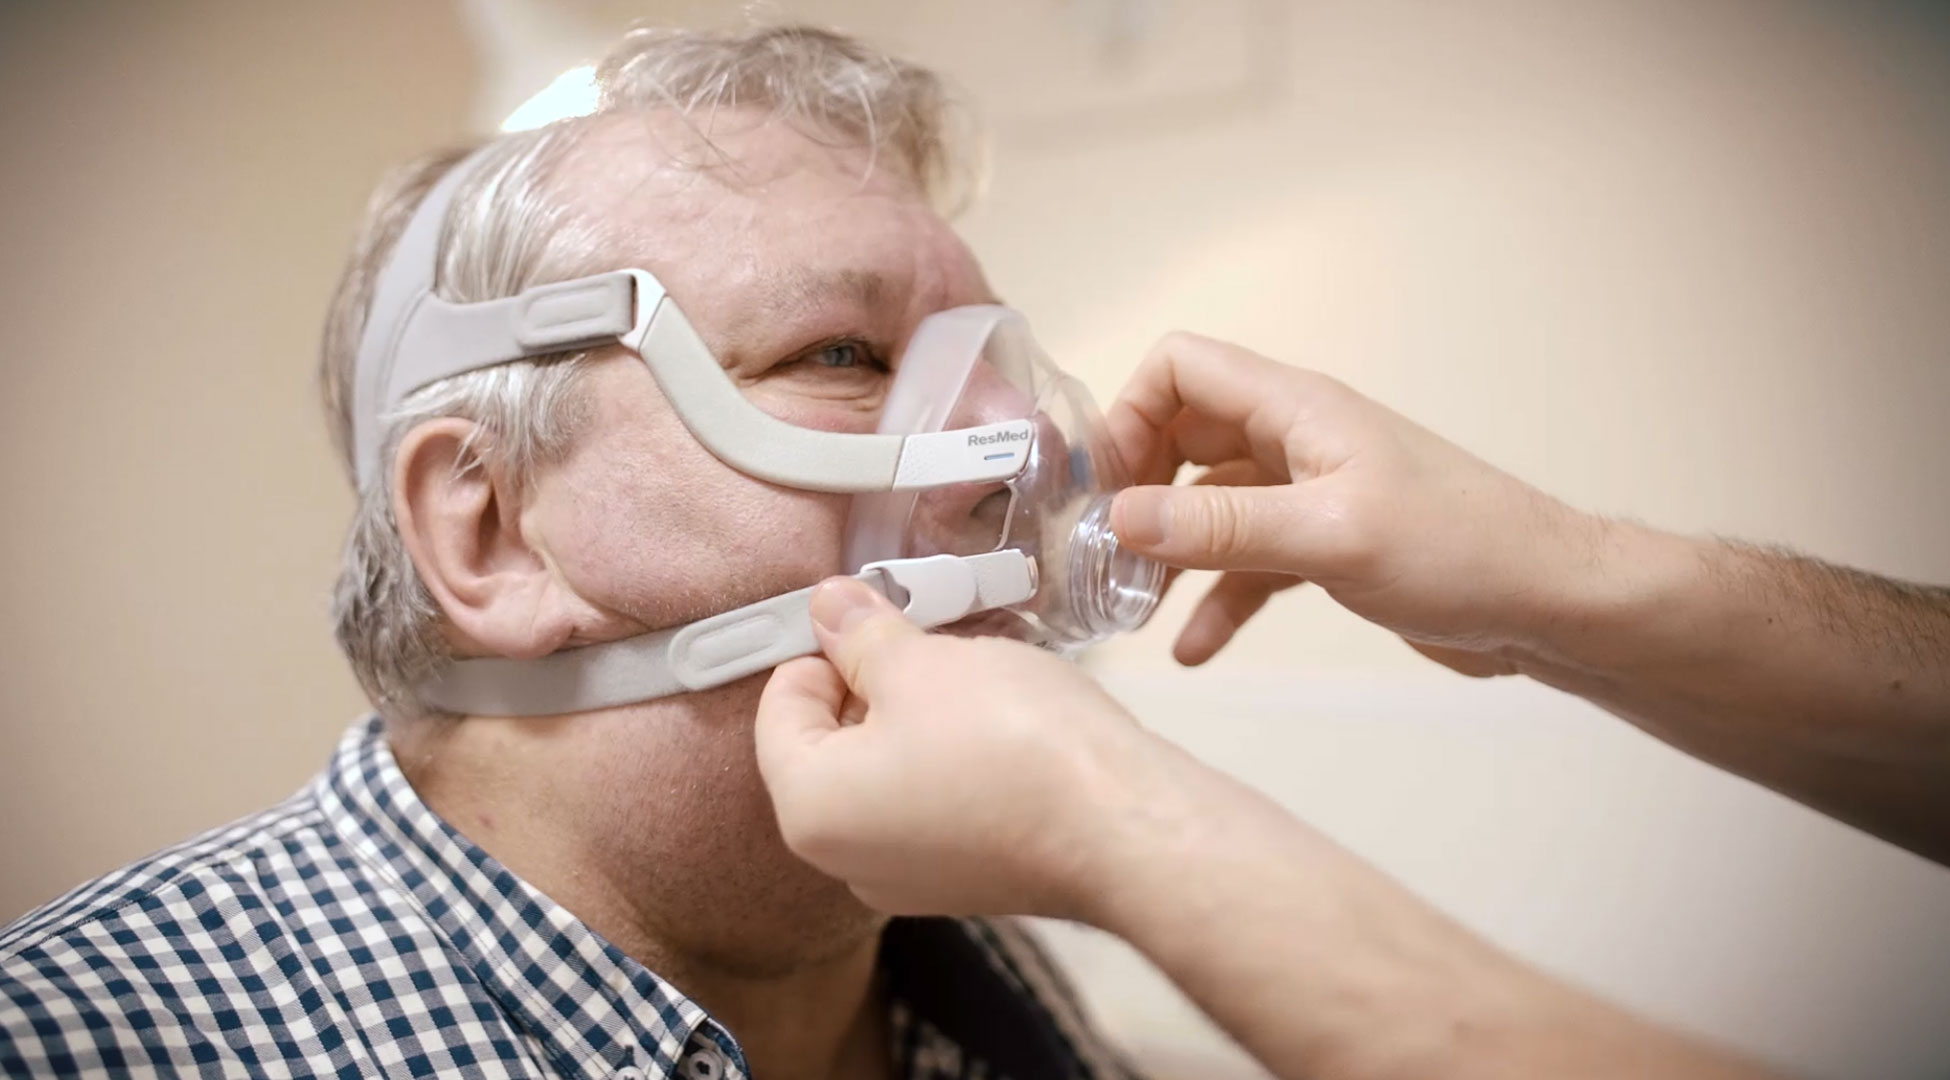 COPD Patient having ResMed mask fitted